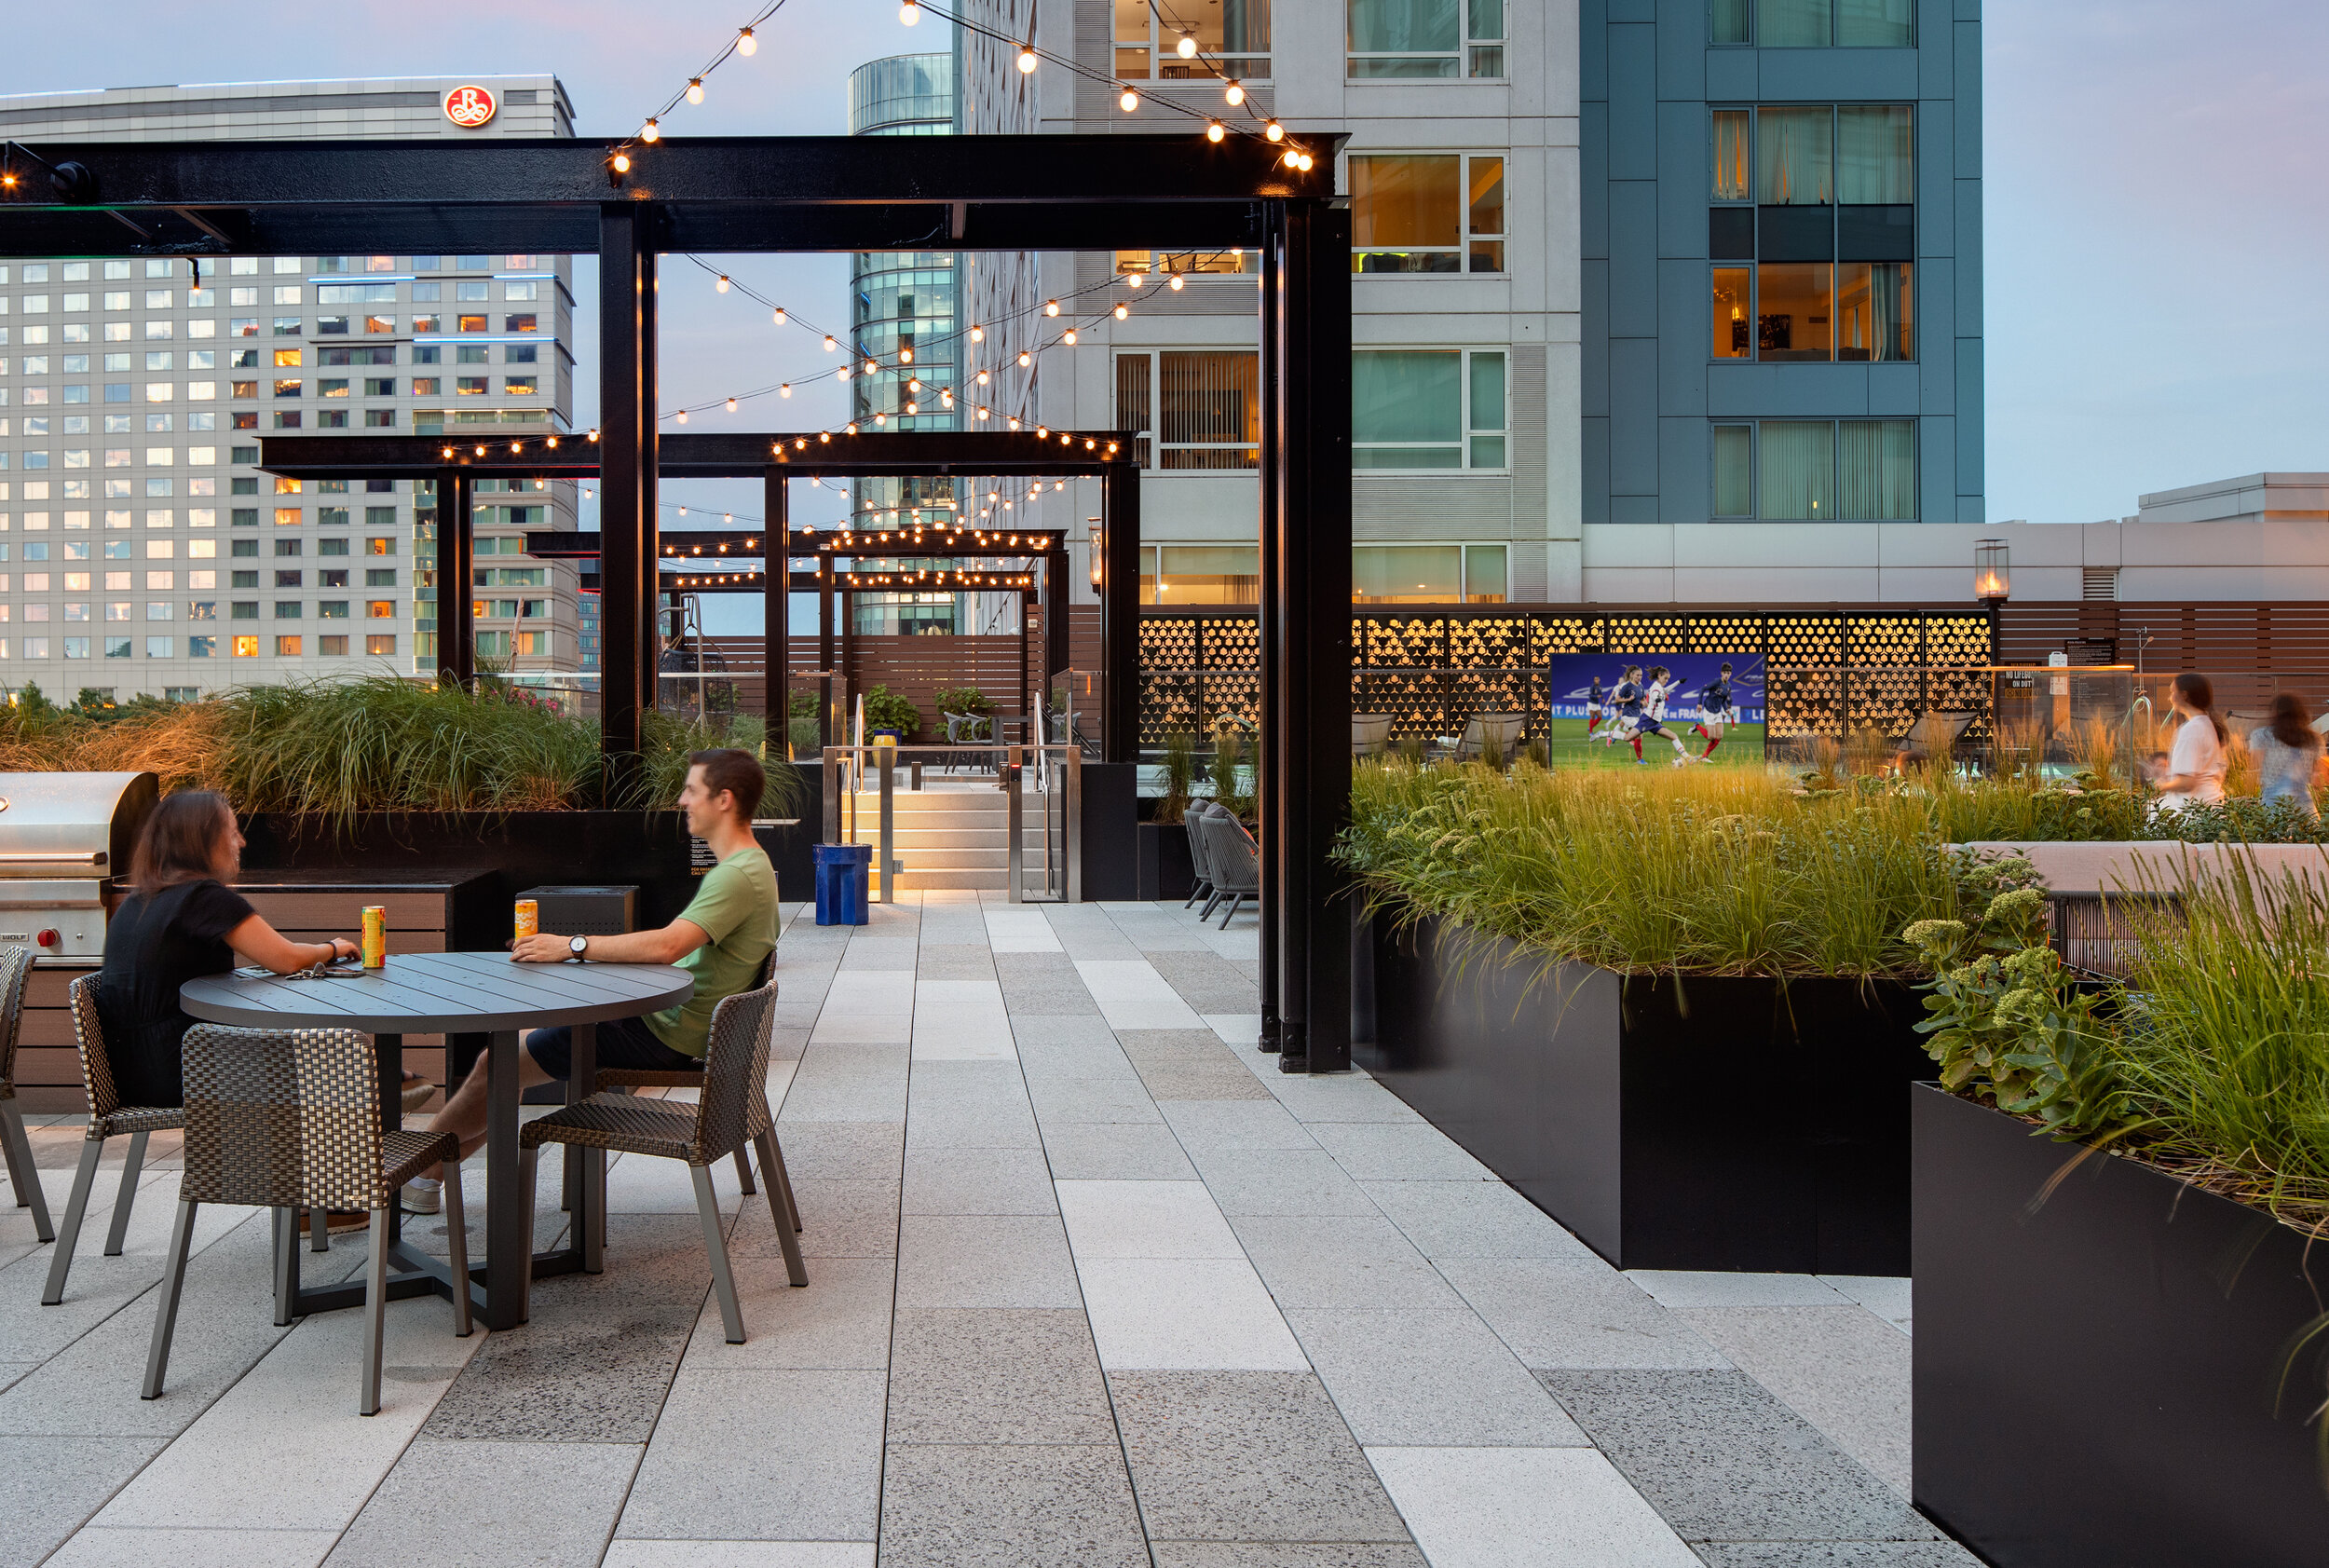  Grill stations with pergola lighting at Gables Seaport Amenity Terrace (Photo by Ed Wonsek) 